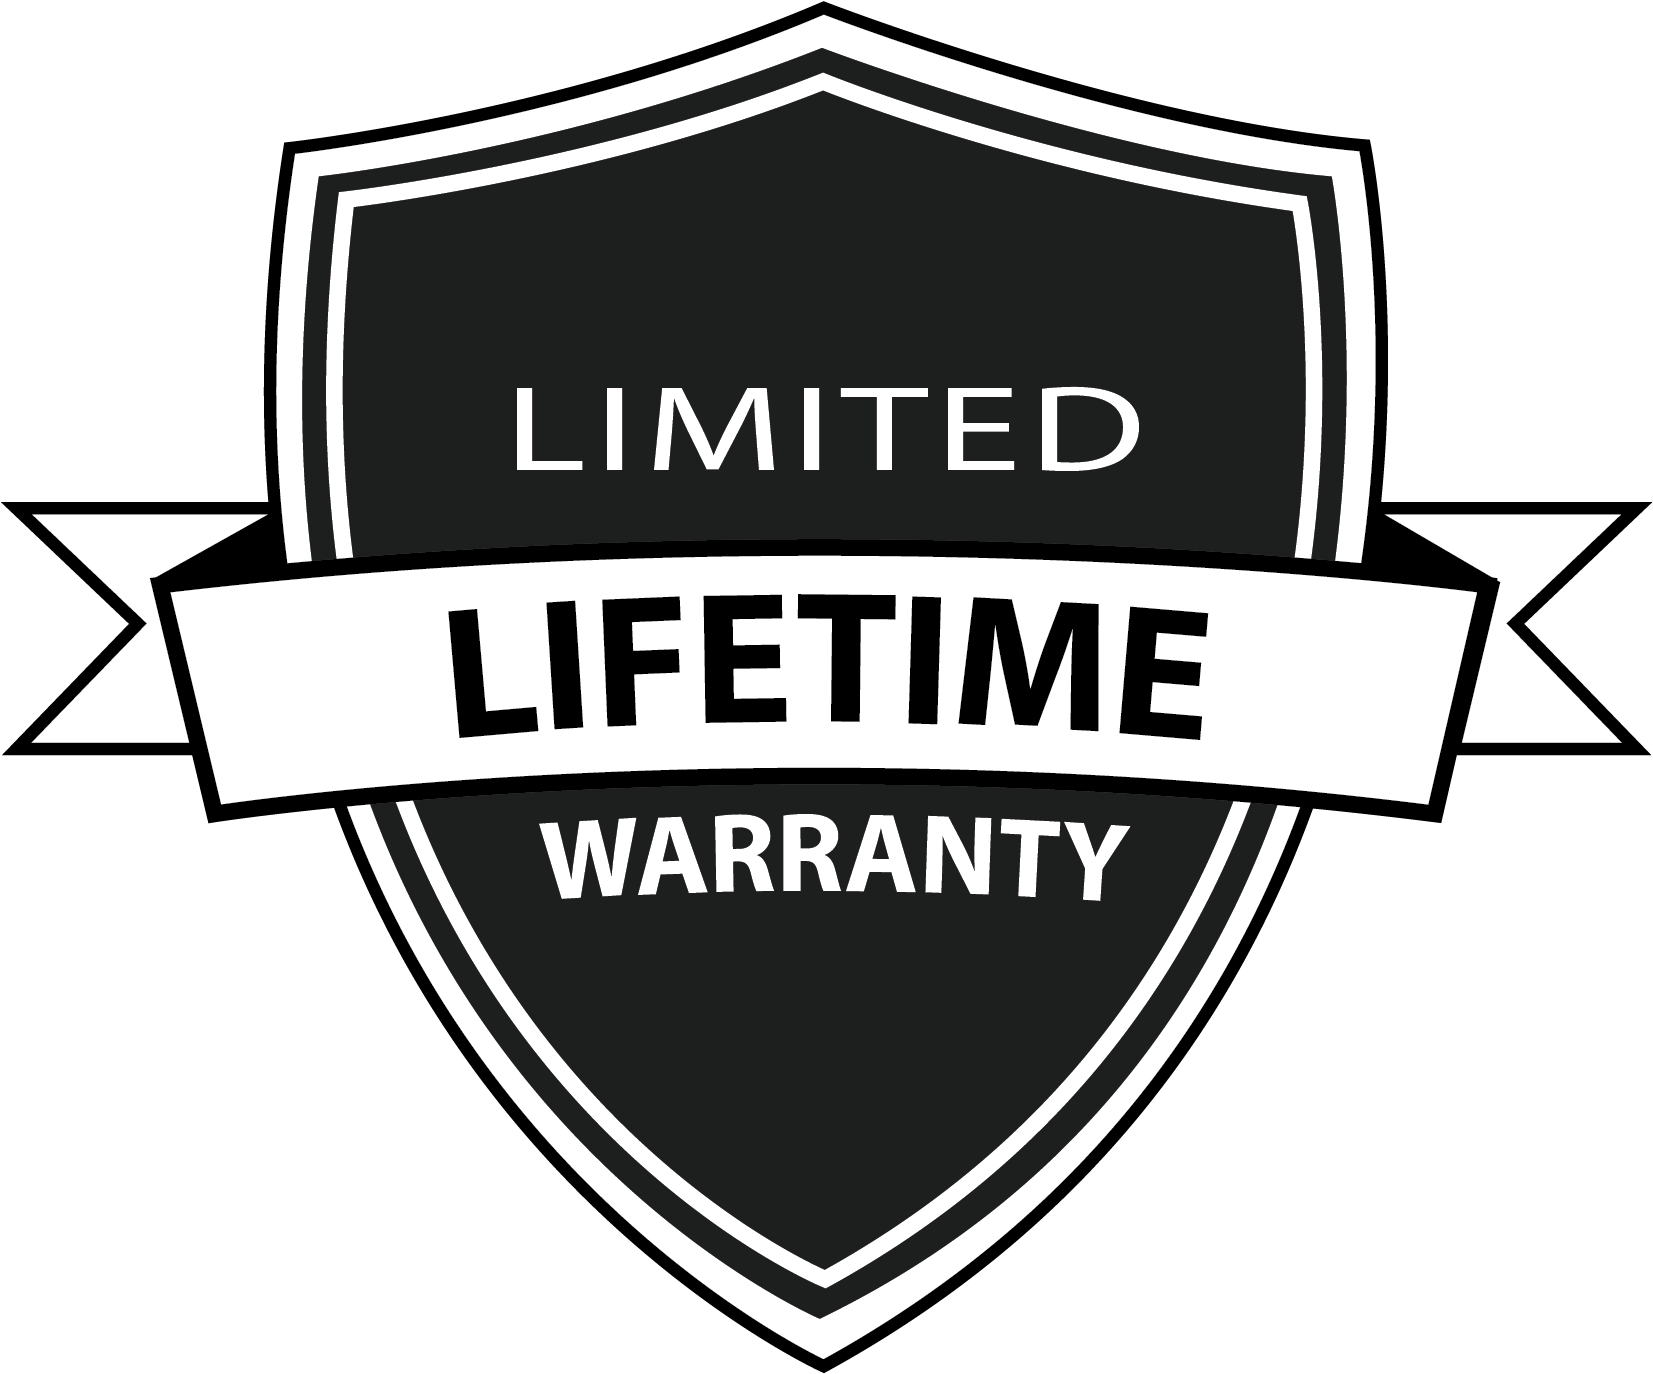 5 years Extended Warranty [Limited]